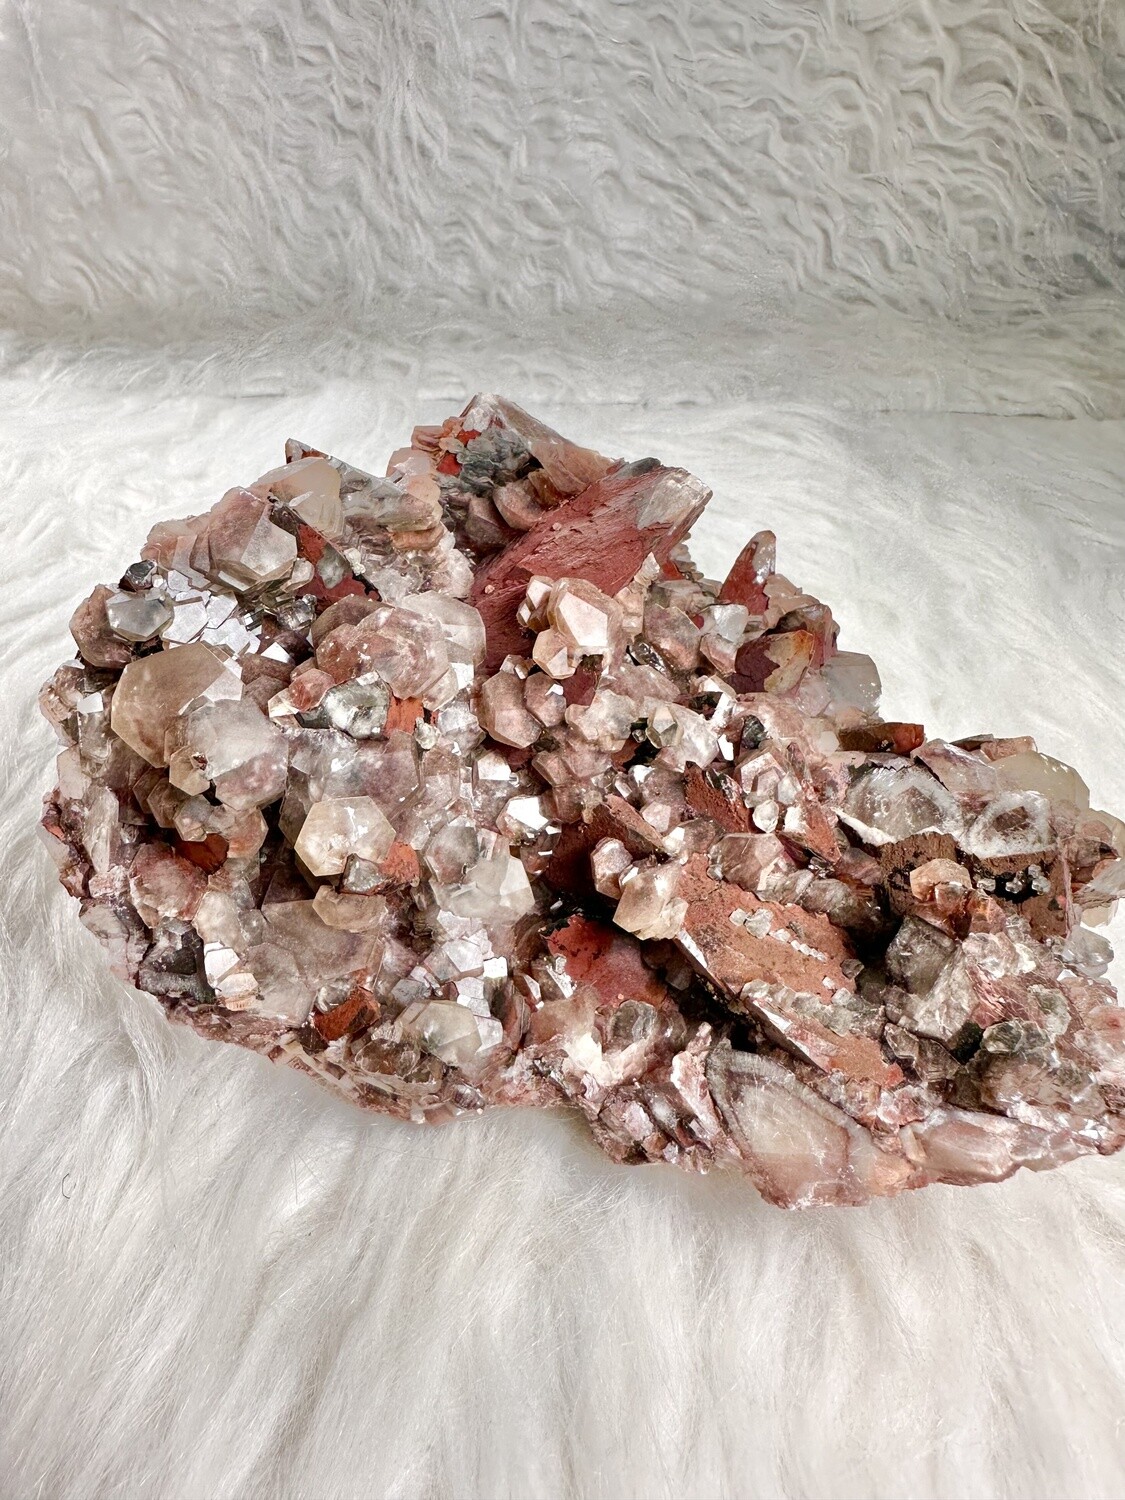 Diamond Space Station: Leticular Calcite on Red Hematite